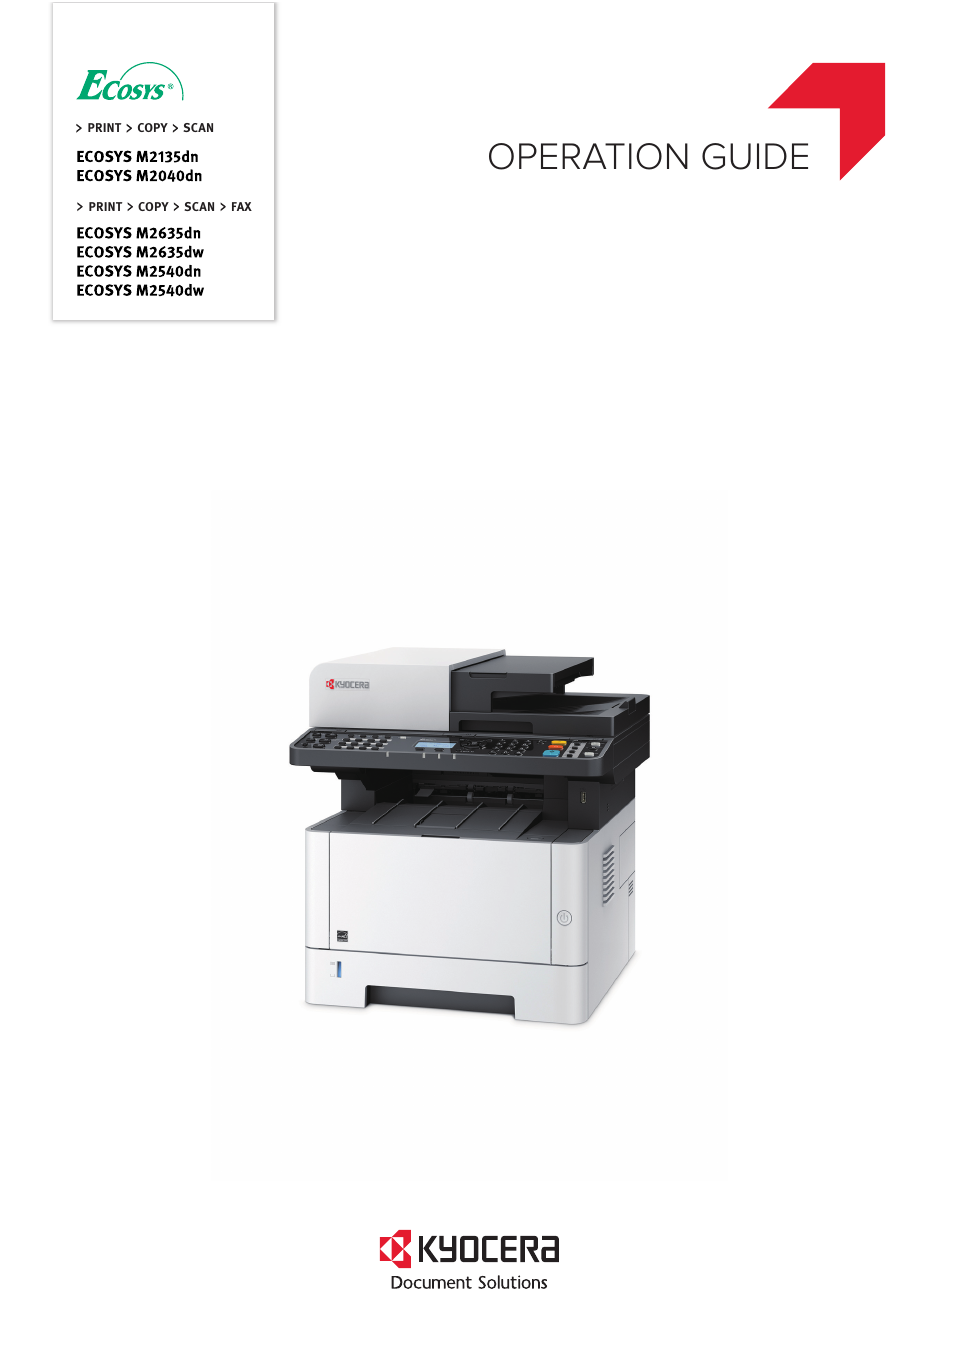 Kyocera Ecosys m2040dn User Manual | 410 pages